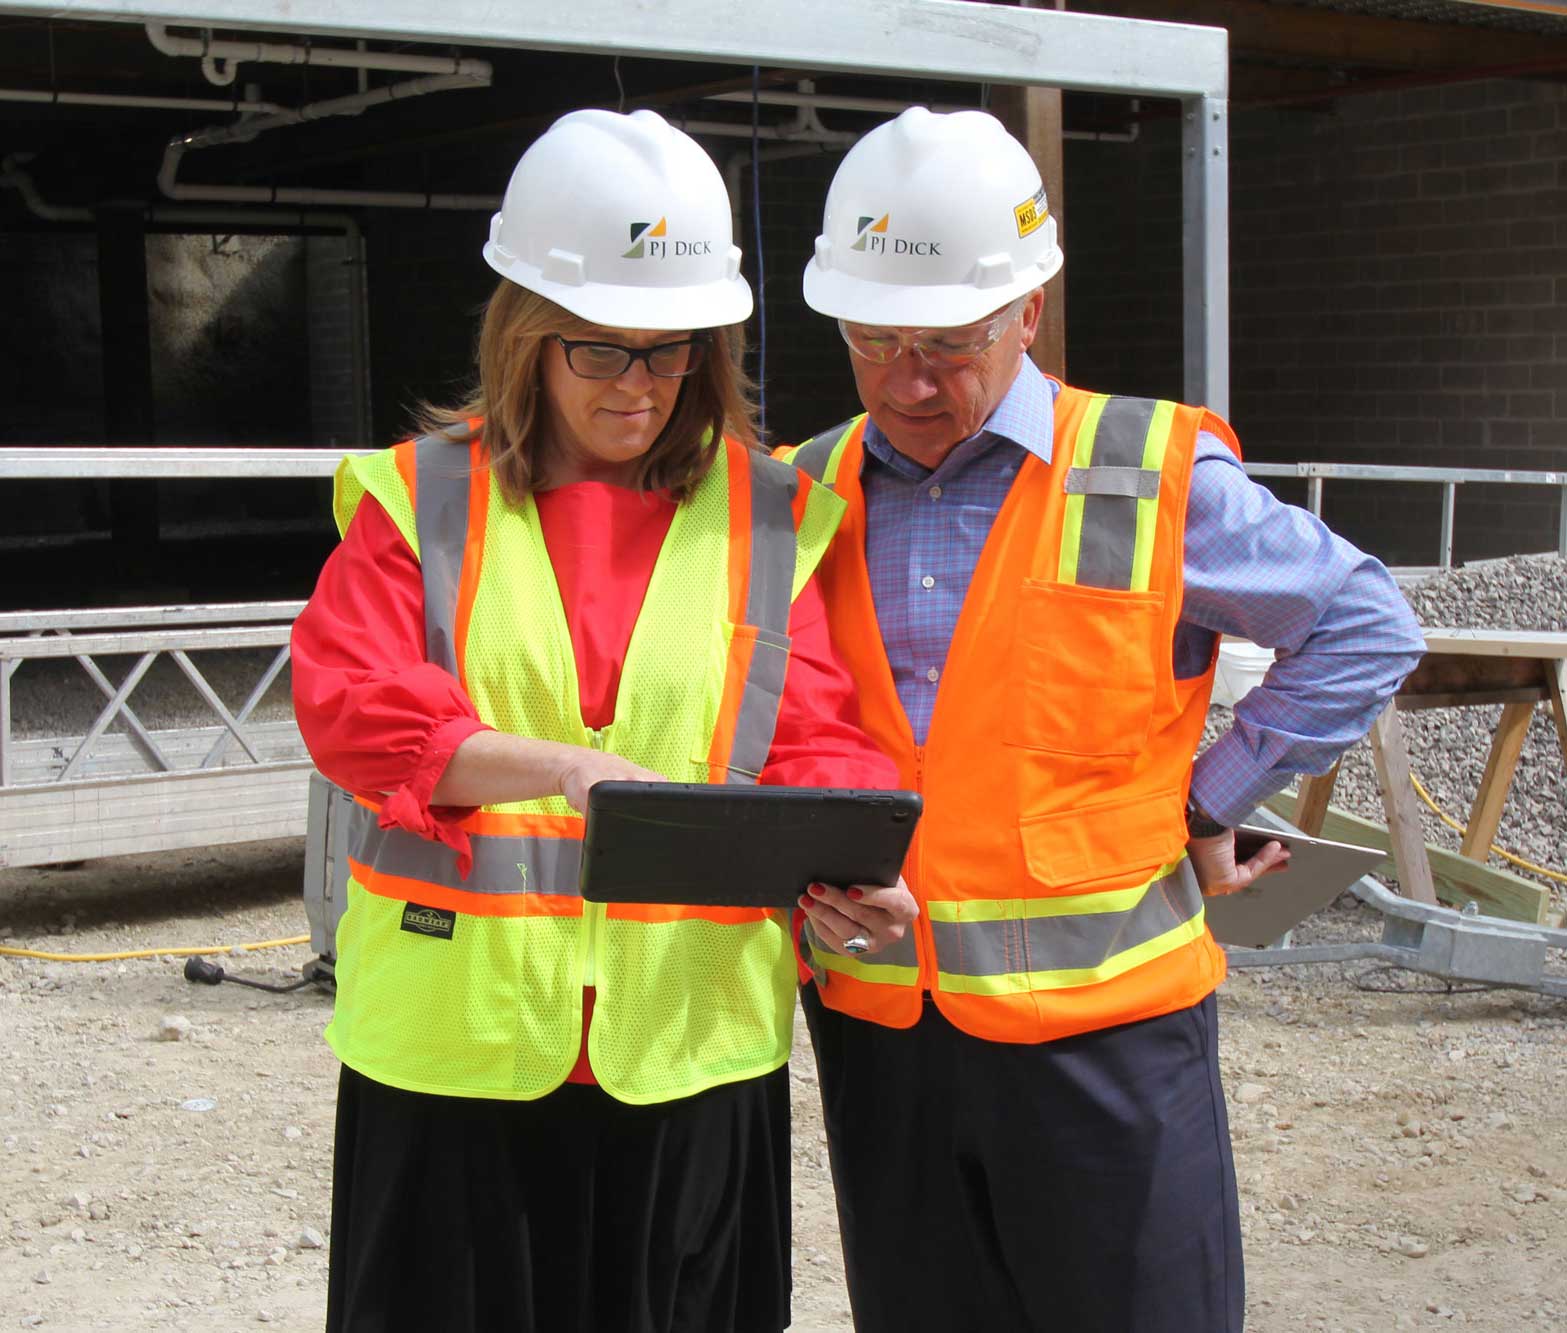 Two PJ Dick employees wearing safety gear looking at ipad